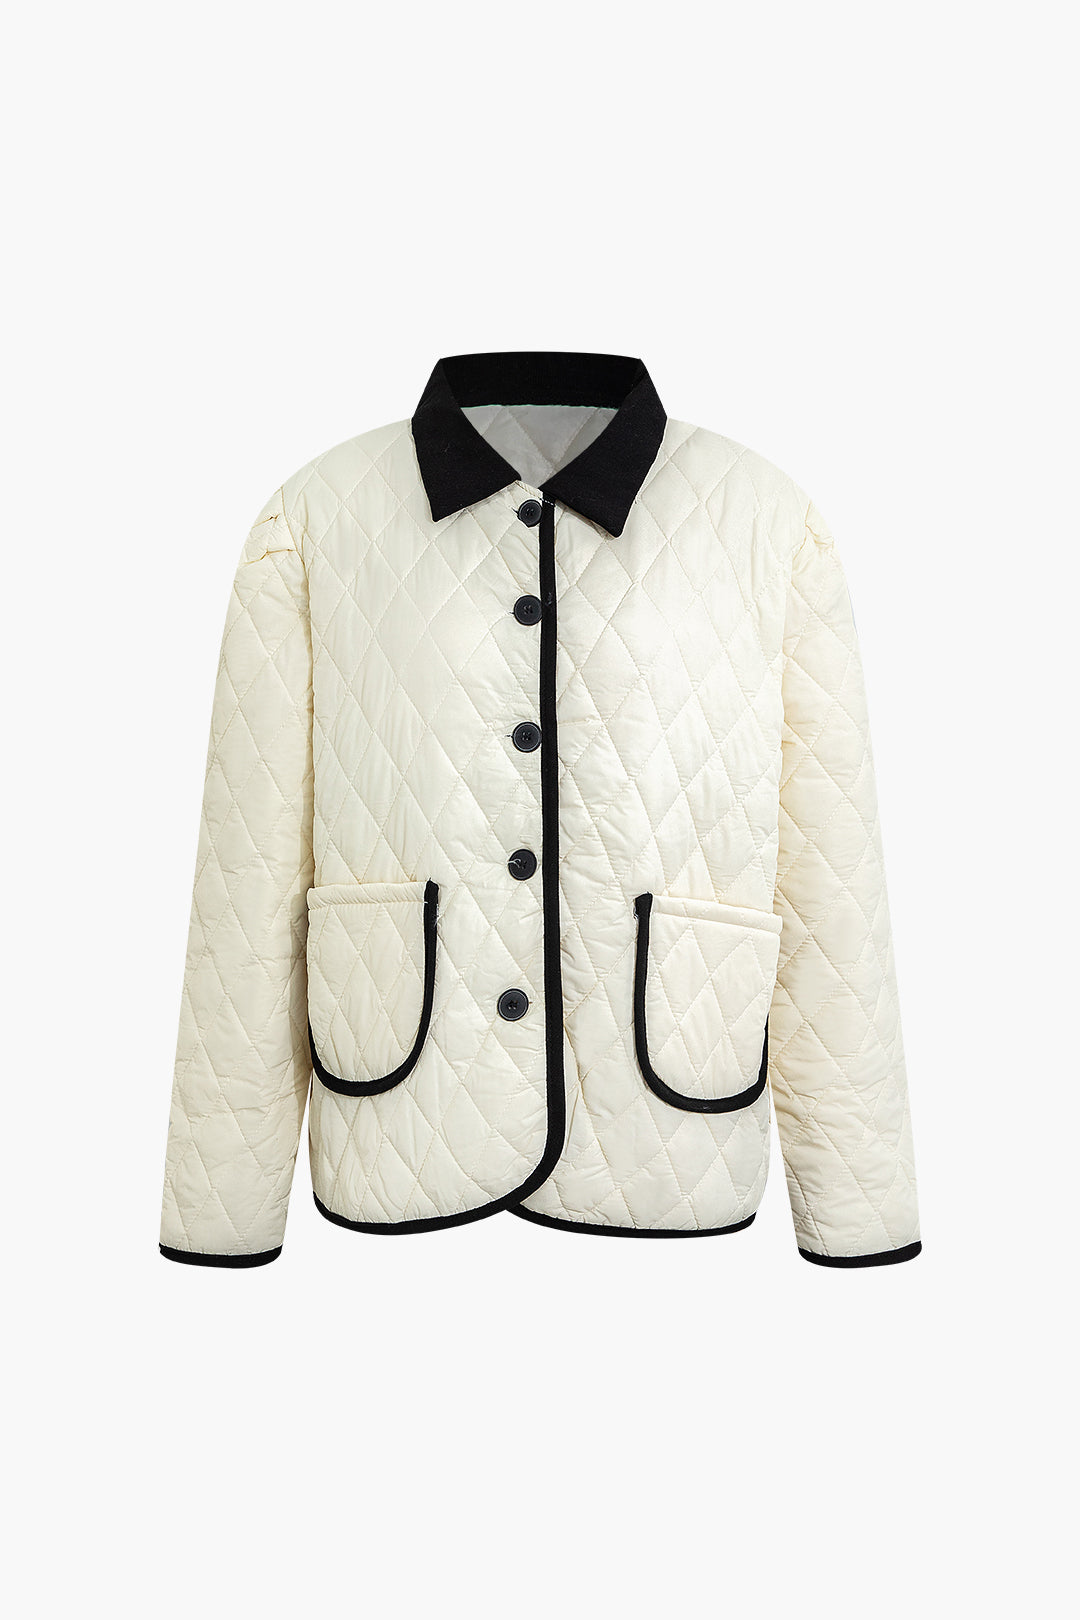 Contrast Trim Diamond Quilted Puffer Jacket